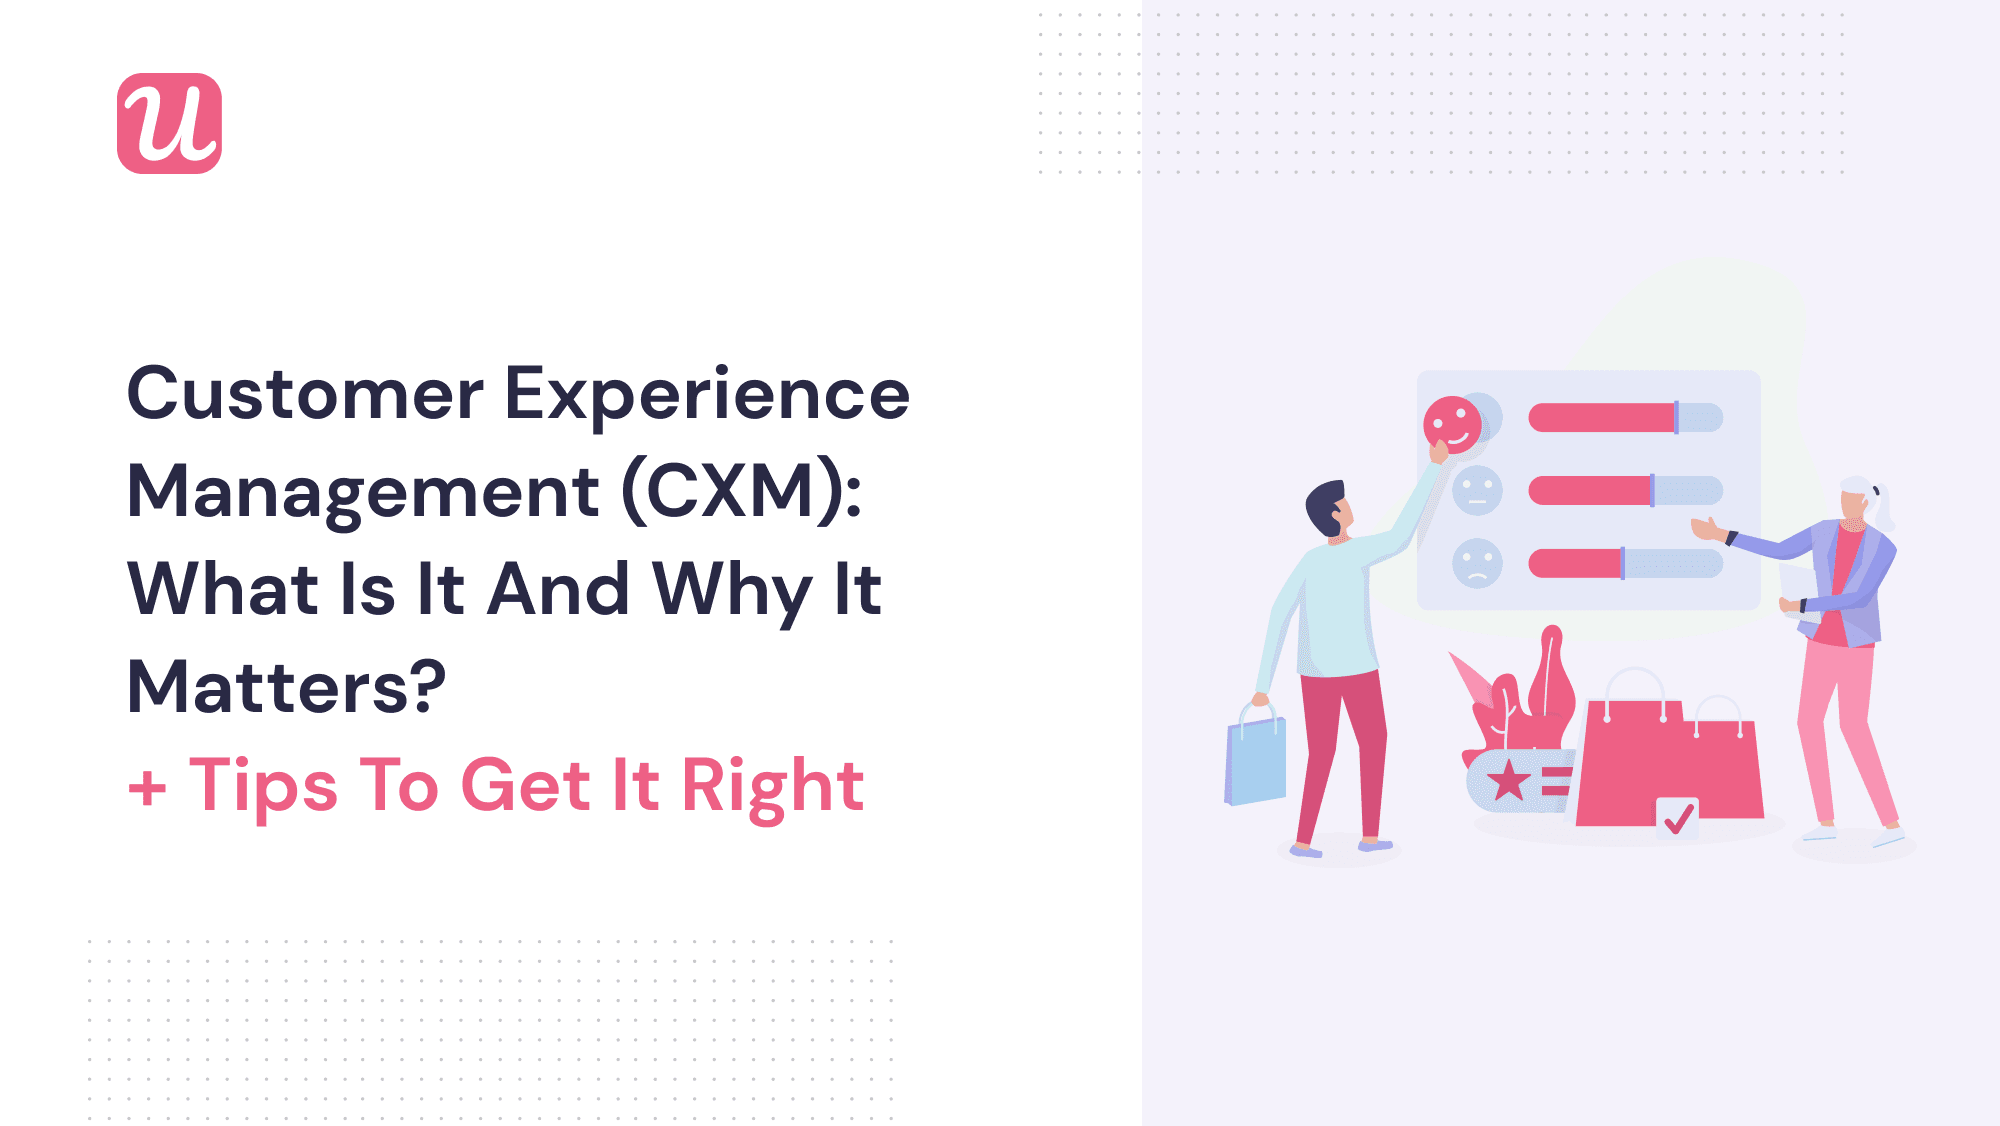 Customer Experience Management (CXM): What Is It and Why It Matters [+ Tips To Get It Right]